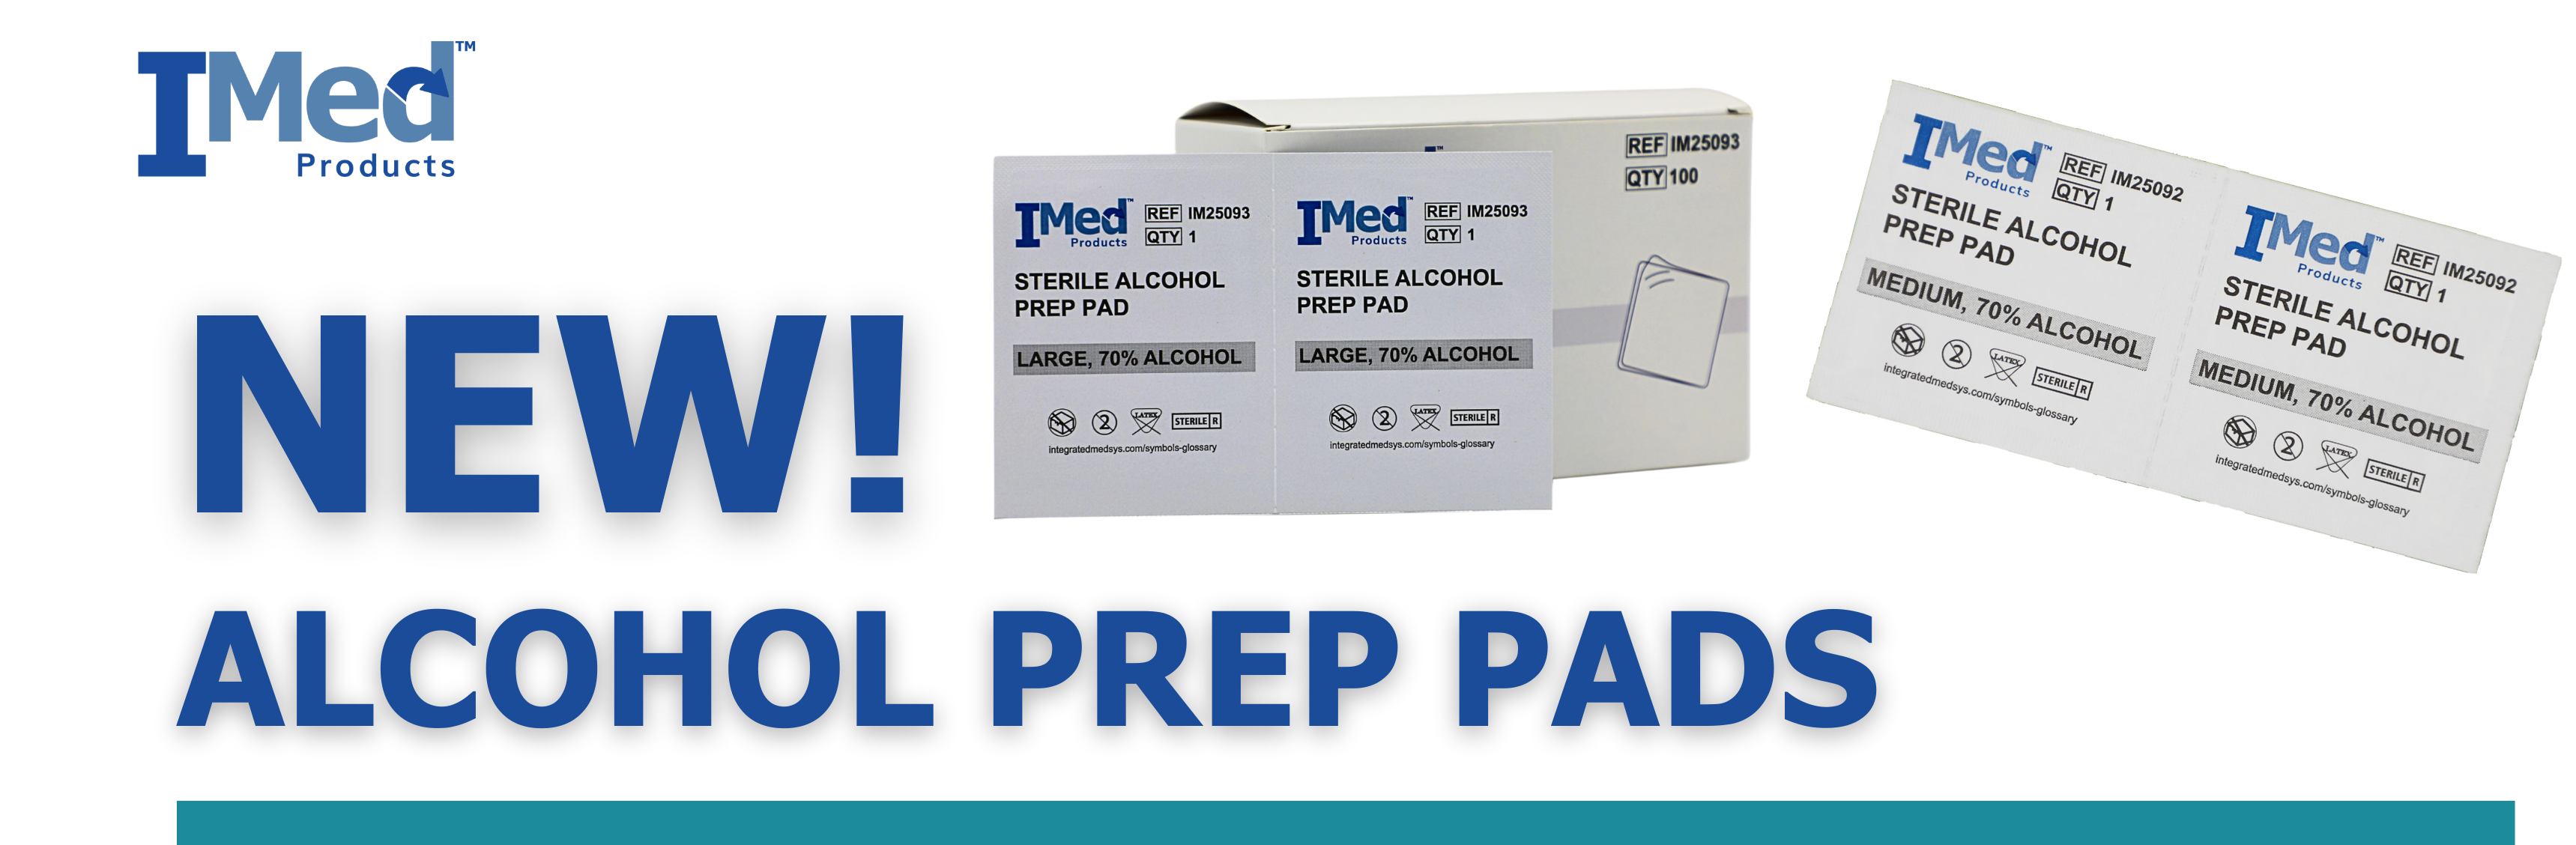 New IMed Alcohol Prep Pads